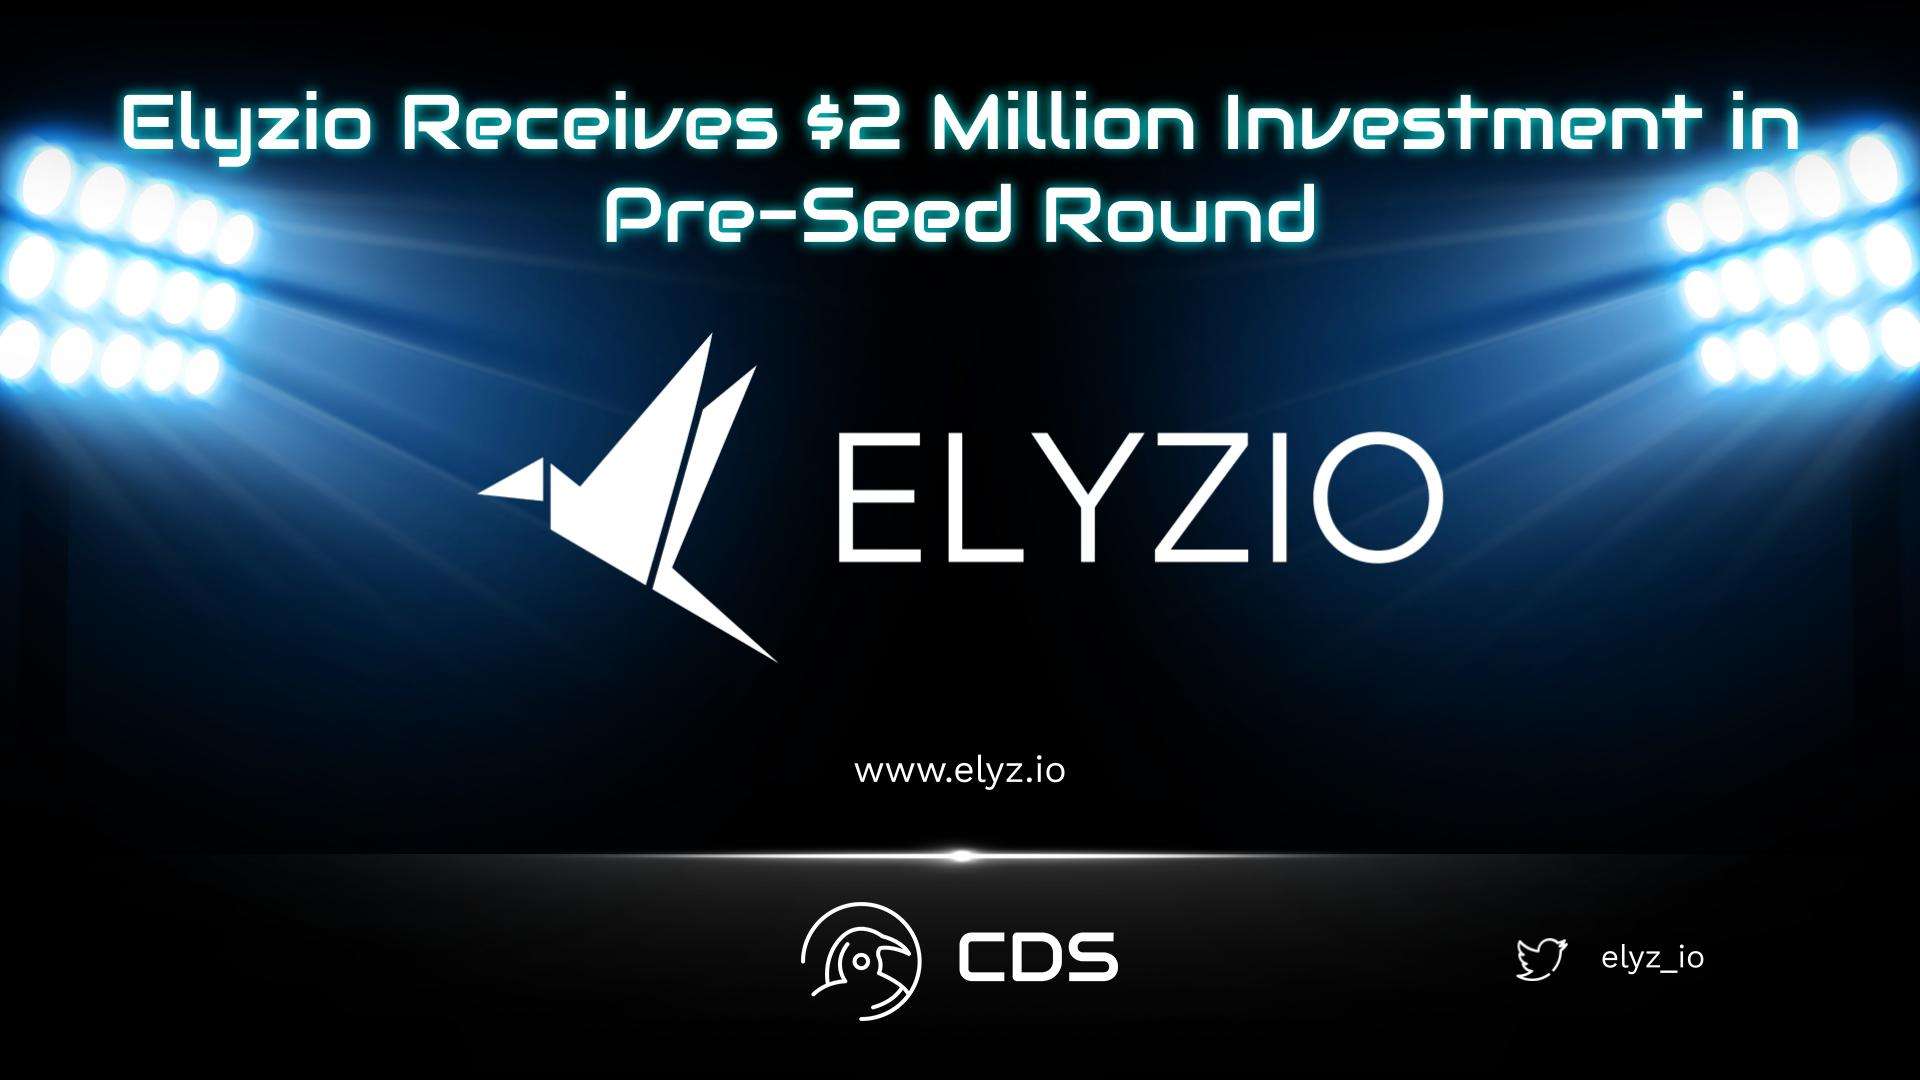 Elyzio Receives $2 Million Investment in Pre-Seed Round